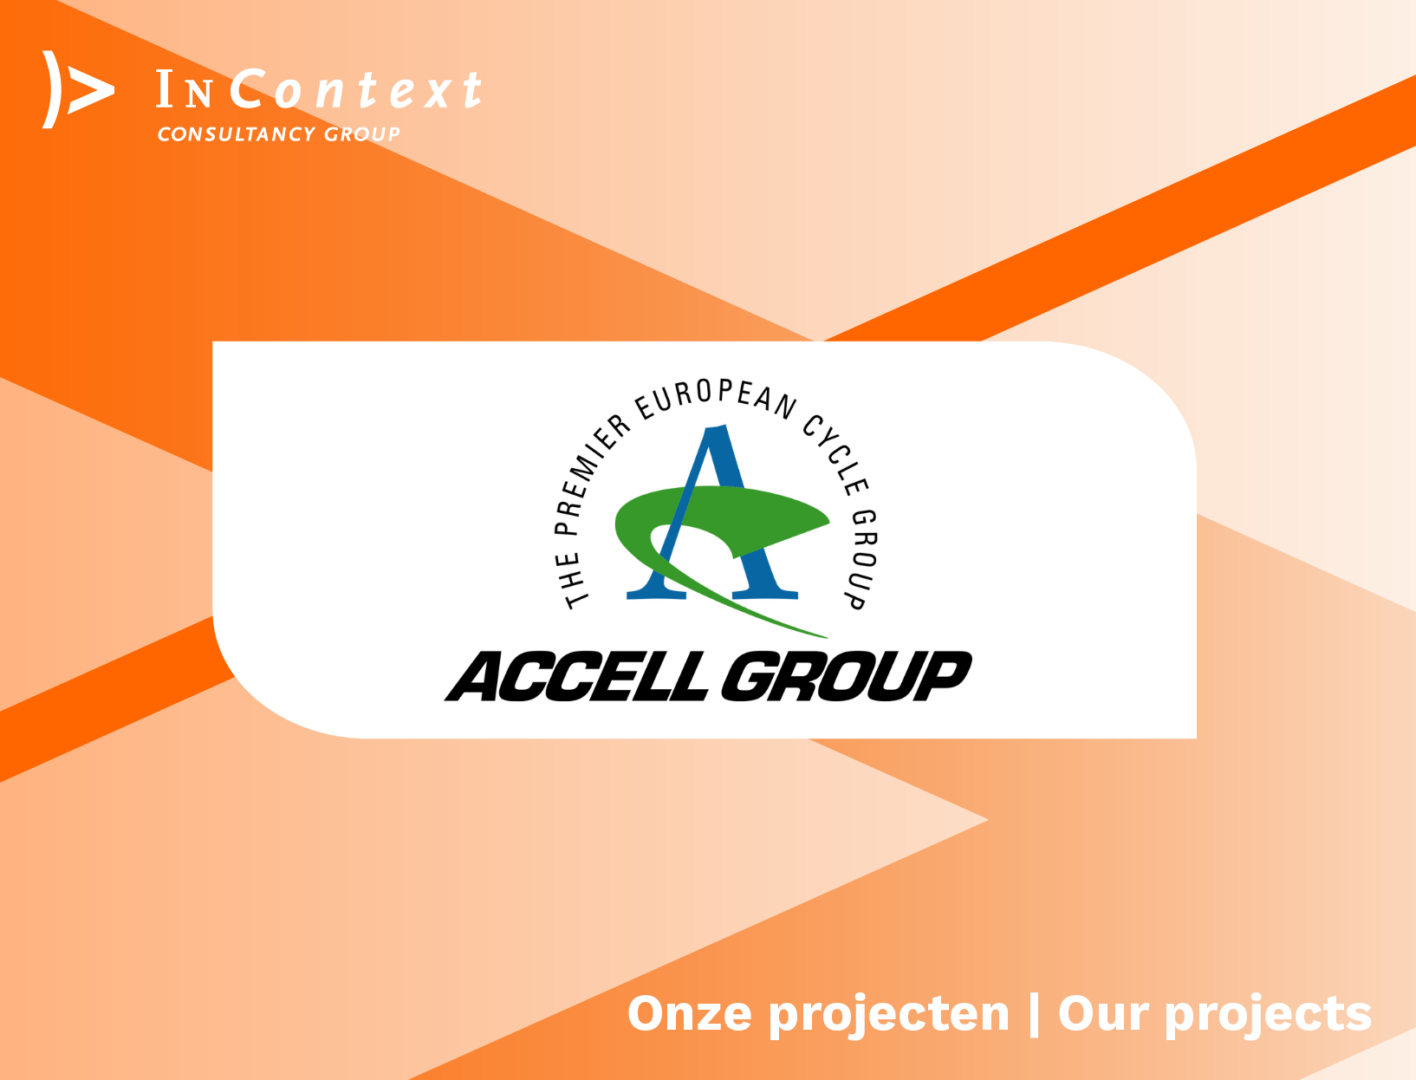 Accell Group case